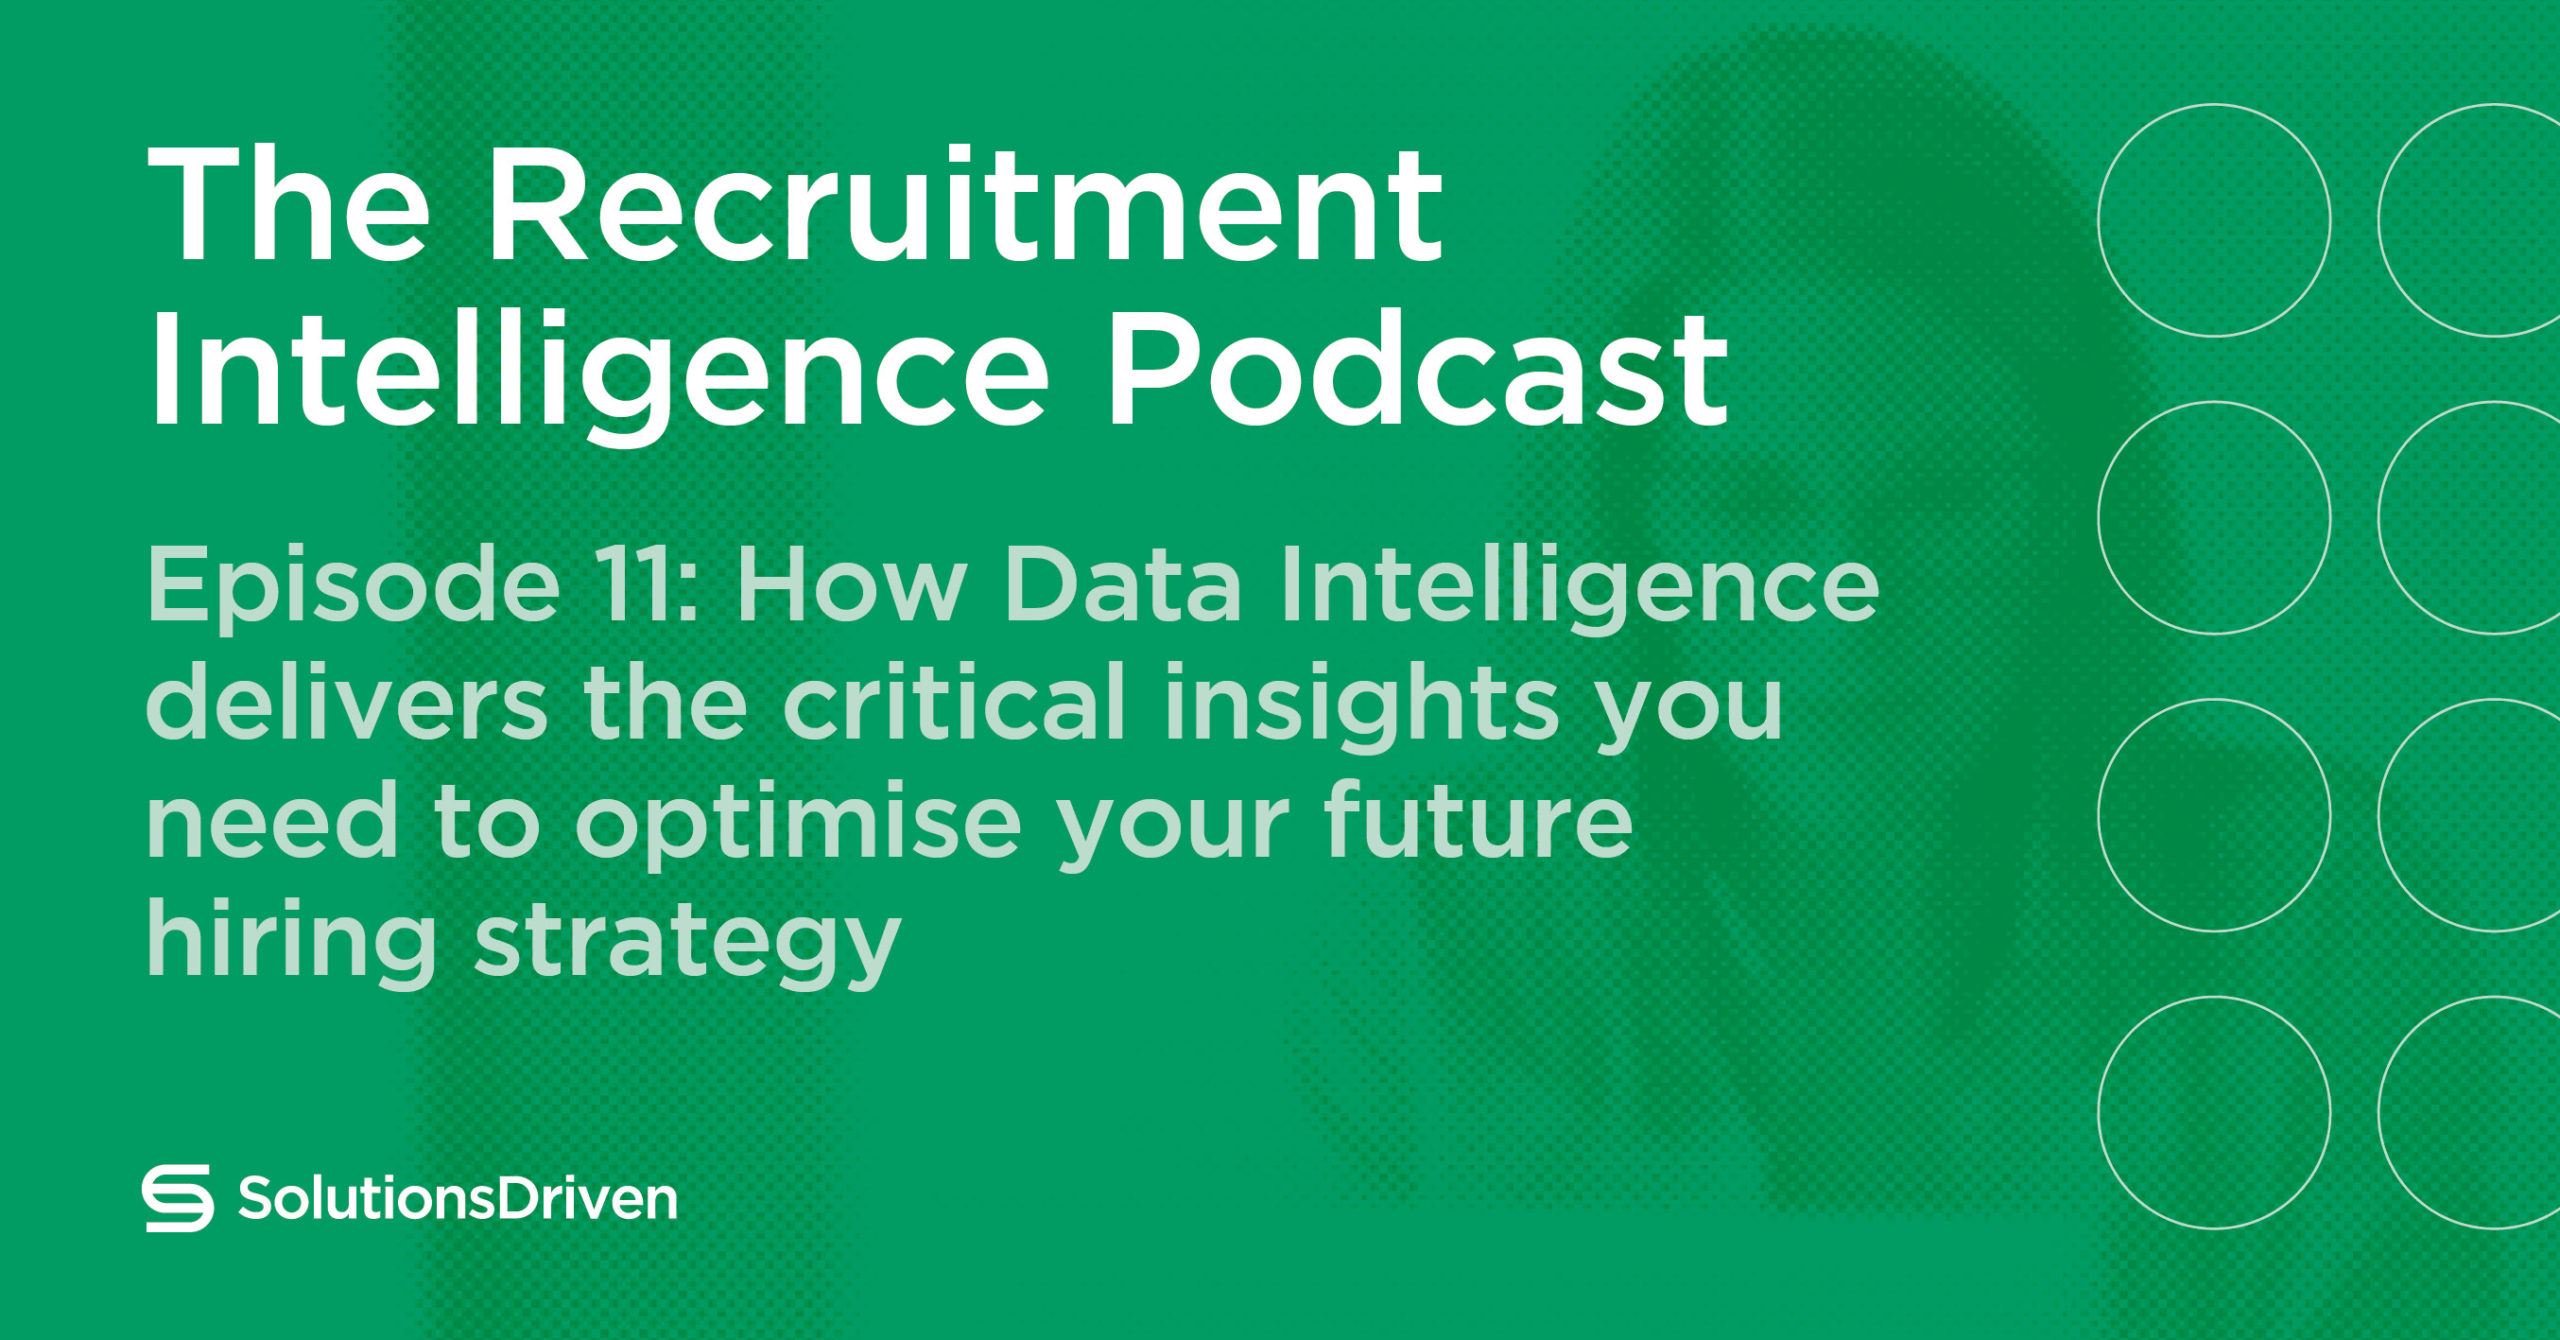 How Data Intelligence Delivers The Critical Insights You Need to Optimise Your Future Hiring Strategy